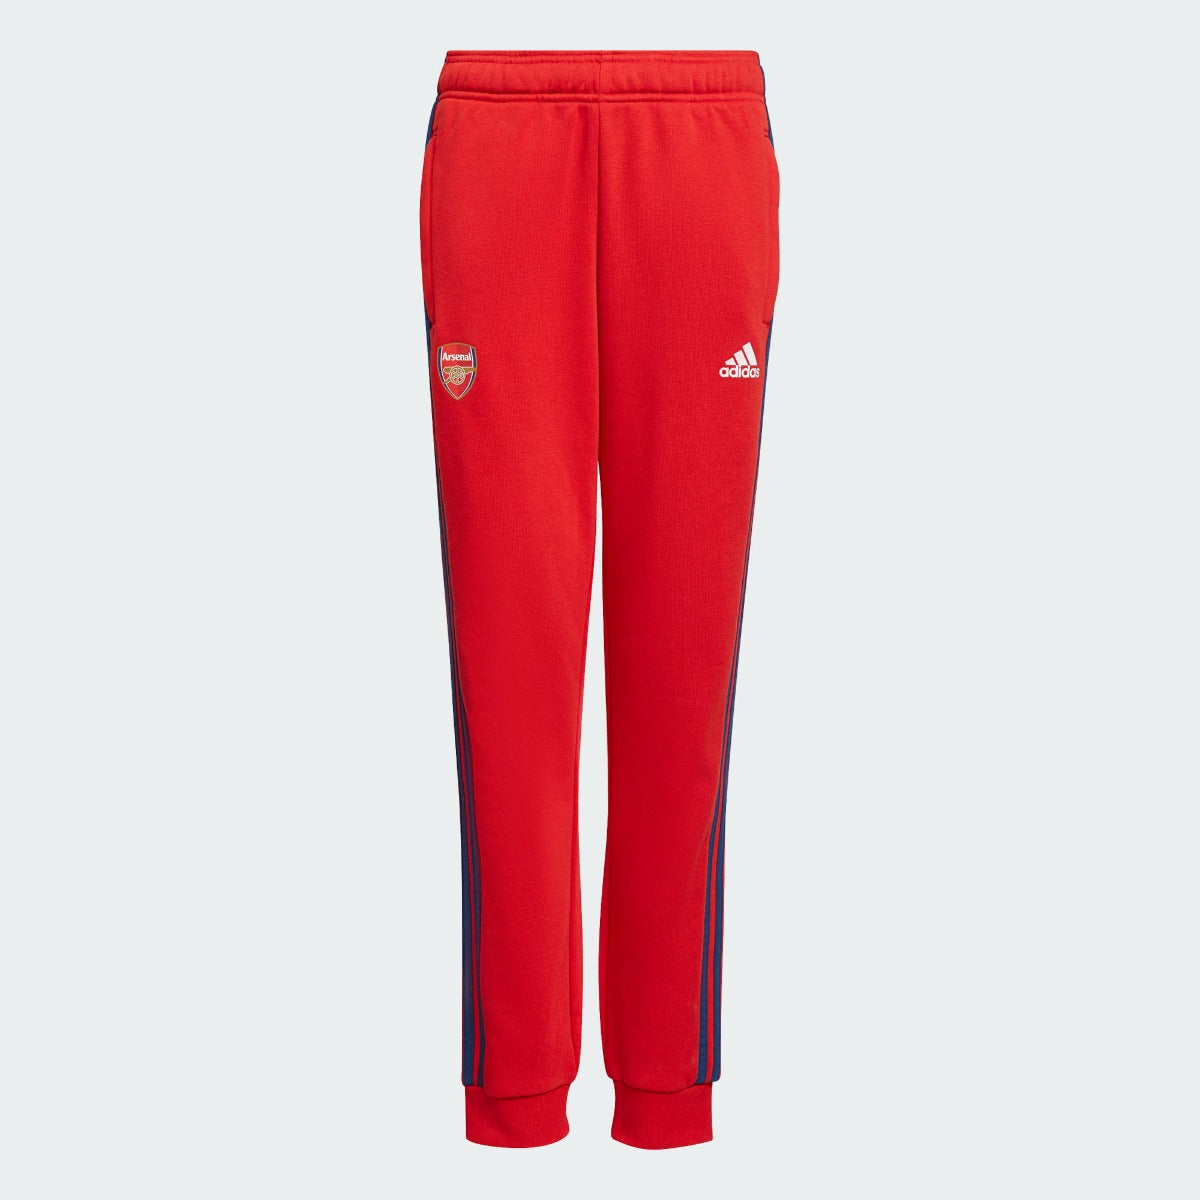 Adidas 2021-22 Arsenal Youth Sweatpants- Scarlet (Front)